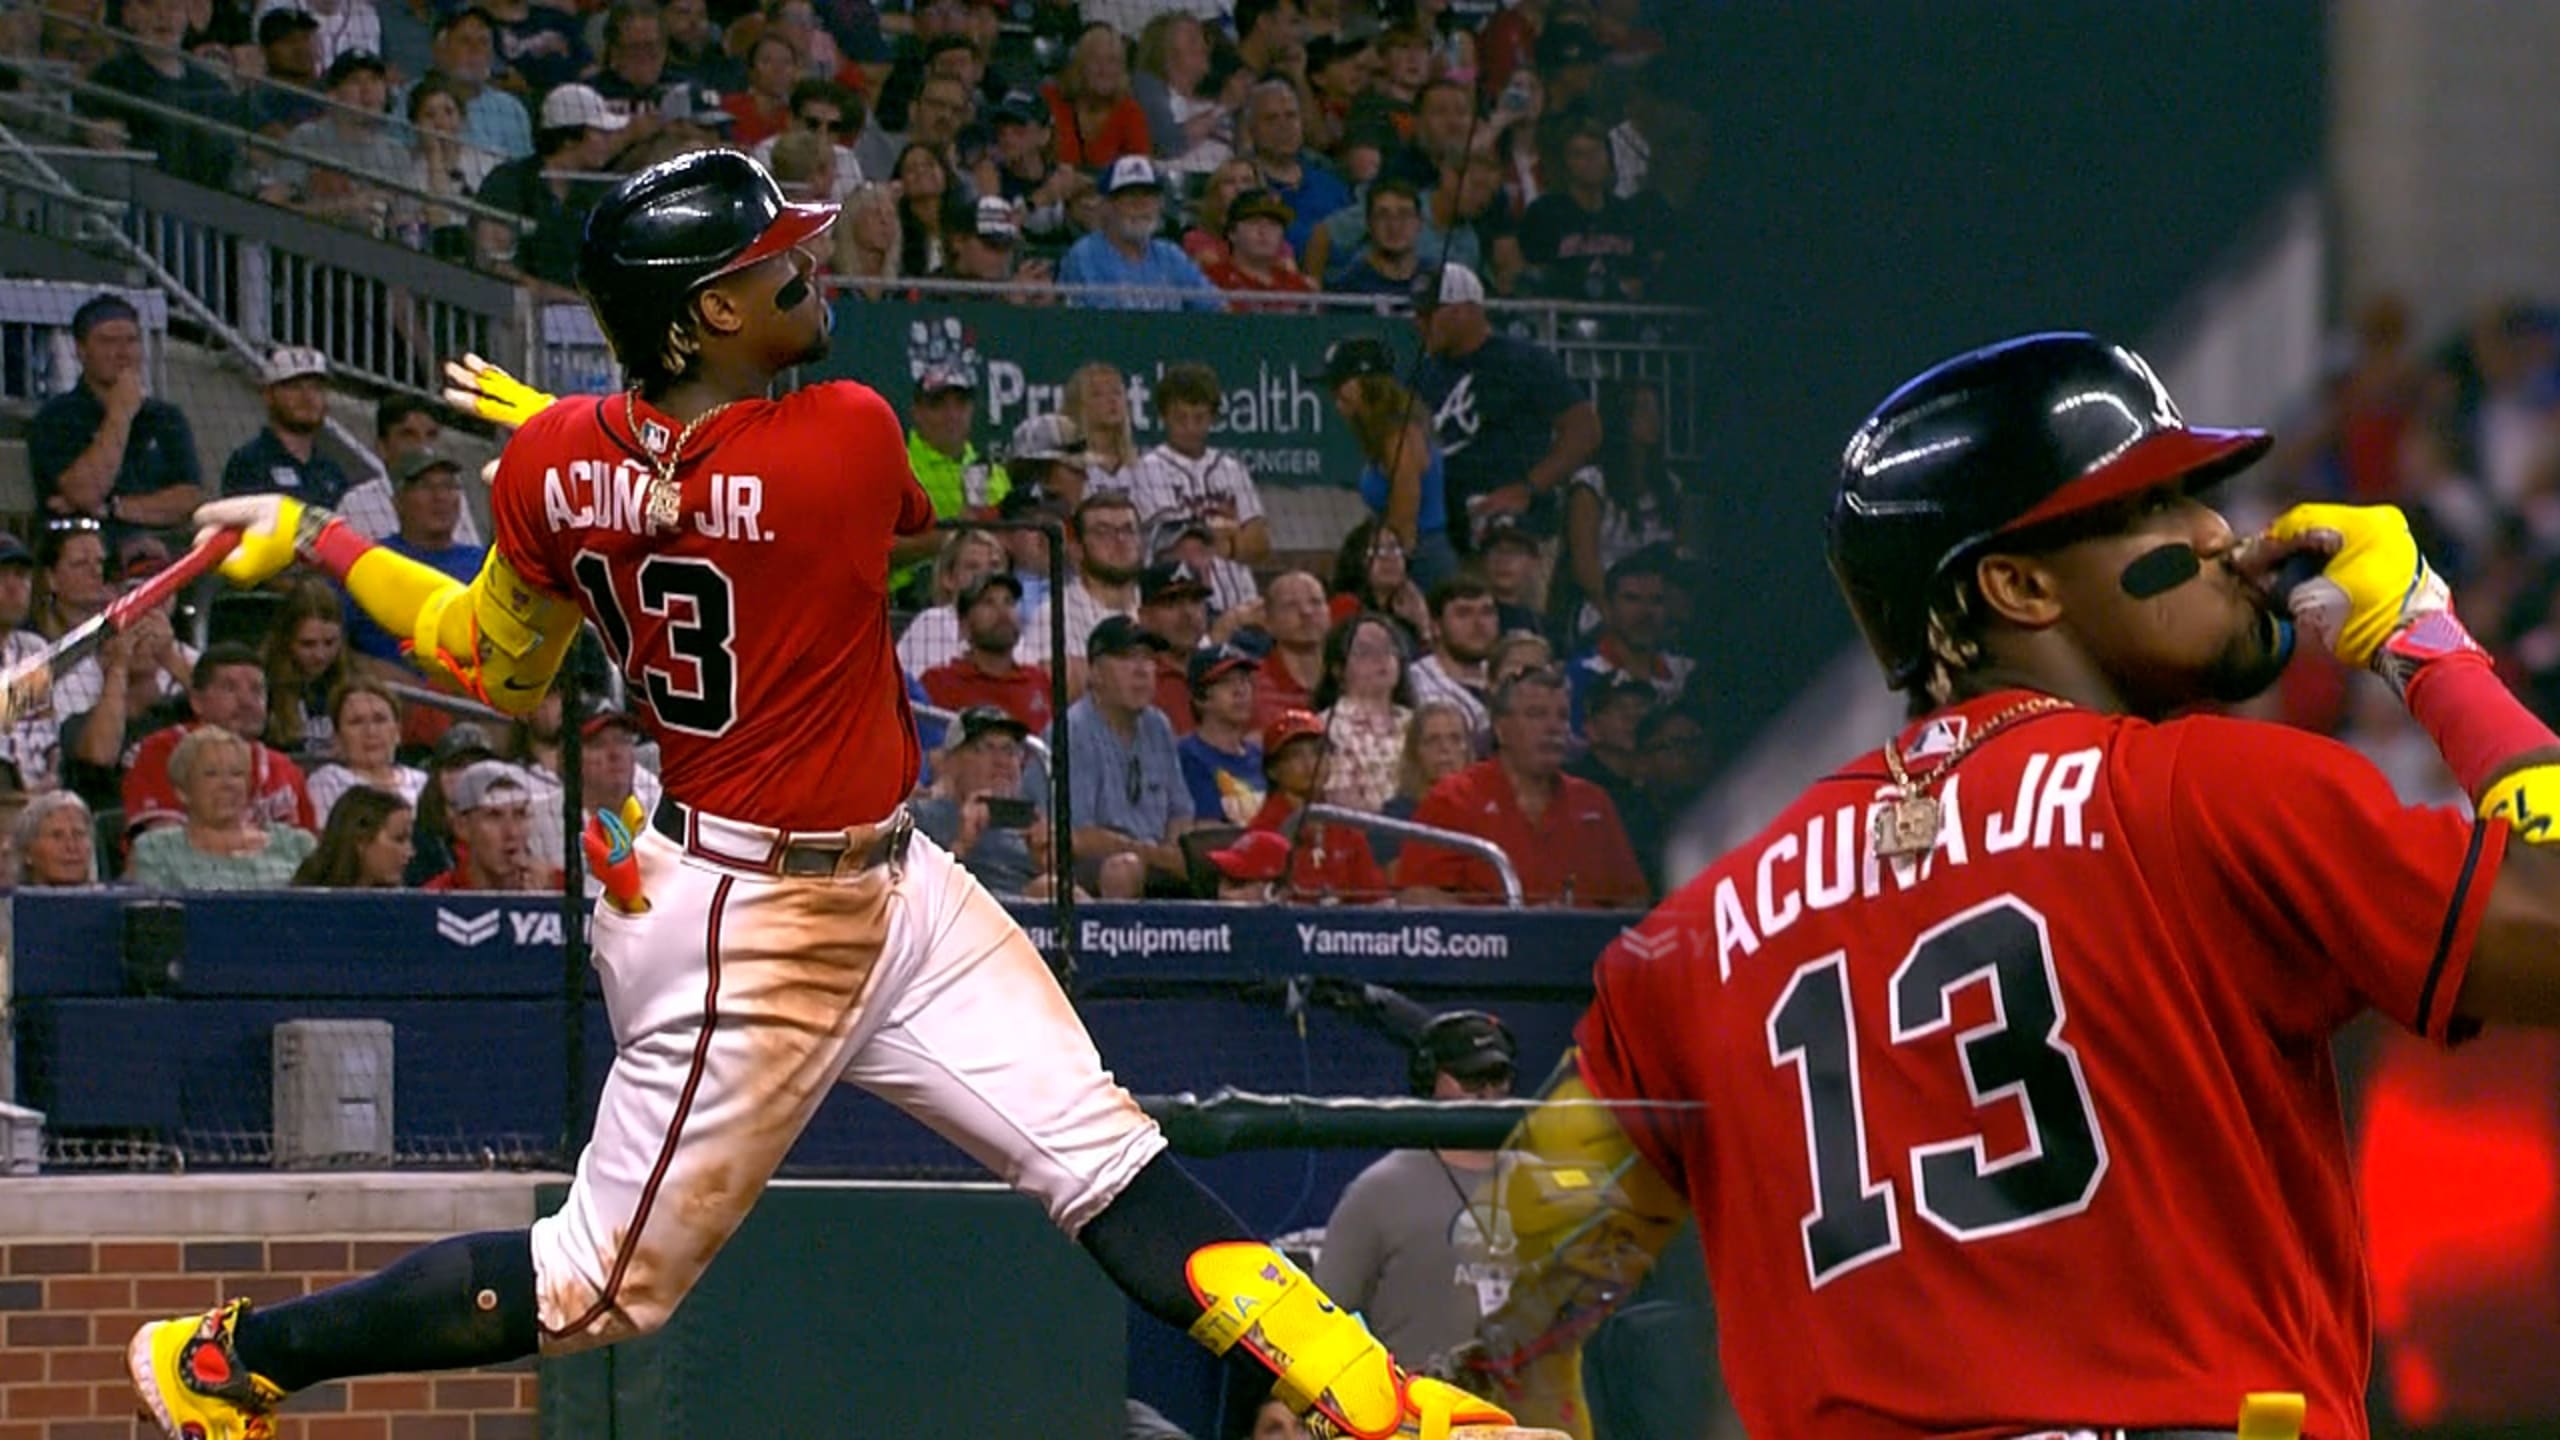 Ronald Acuña Jr. SLAMS his way into HISTORY!! Braves star is the 1st member  of the 30 HR/60 SB club! 